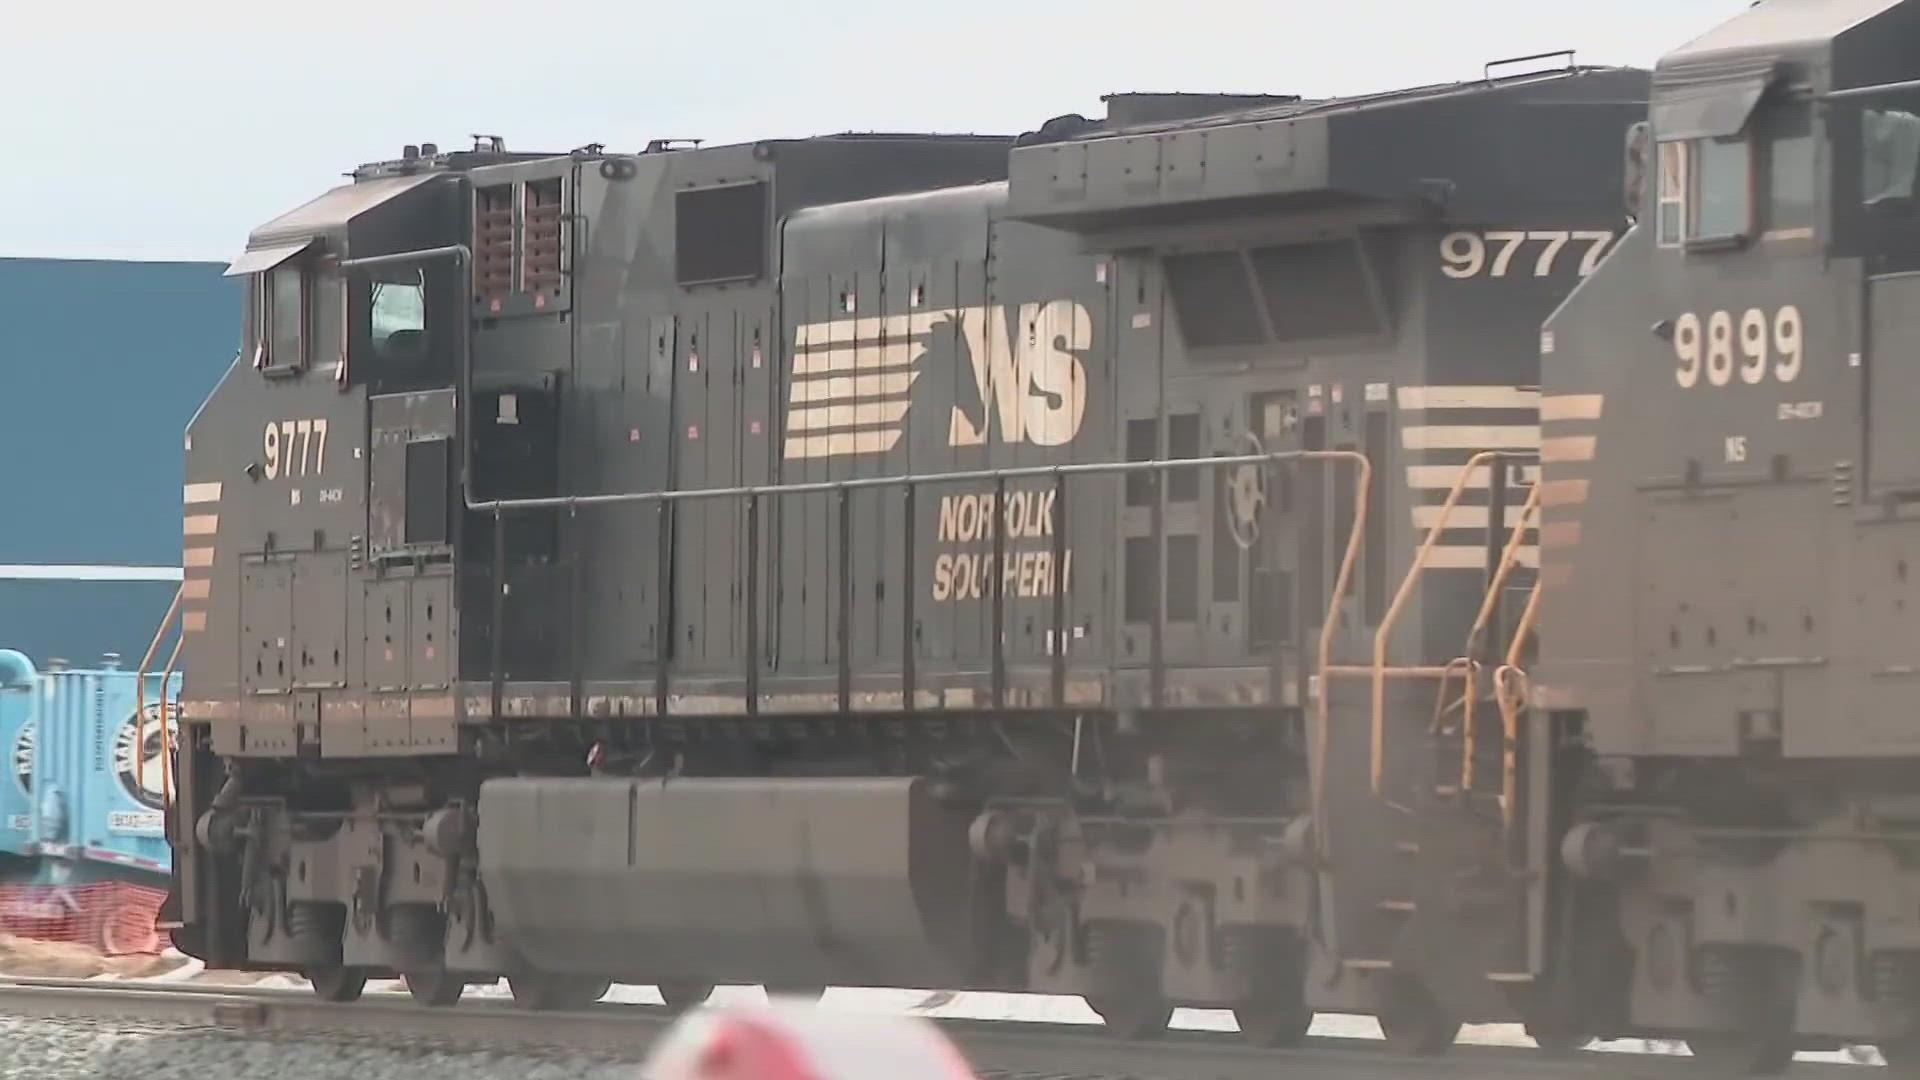 A separate analysis of federal railroad data by 10 Investigates showed that Norfolk Southern trains have derailed in 36 Ohio counties dating back to 2007.